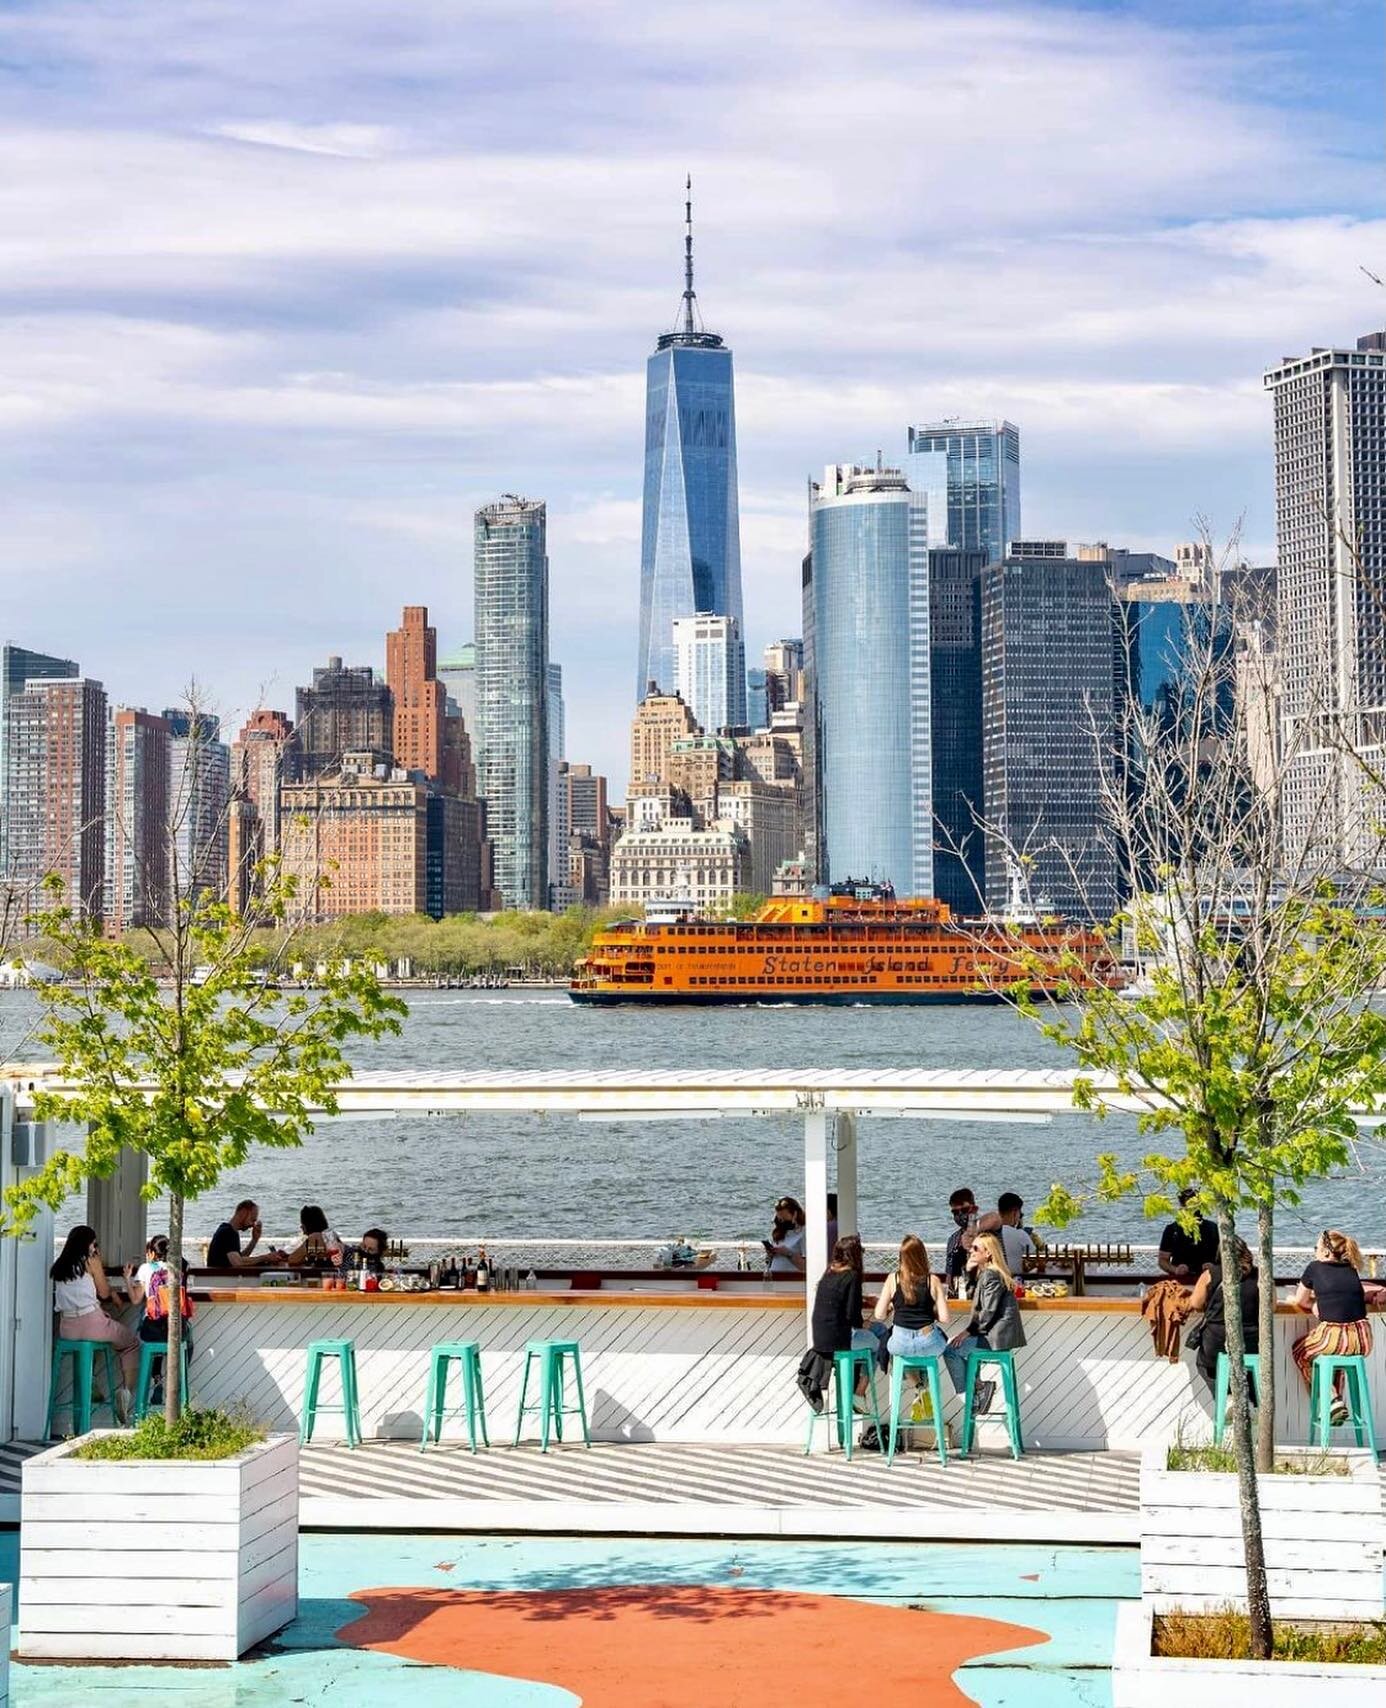 There&rsquo;s a spot for you at the bar!
@islandoyster is open for the season. Come join us on @governorsisland every Wednesday through Sunday. 
Awesome pic via @kingy27nyc